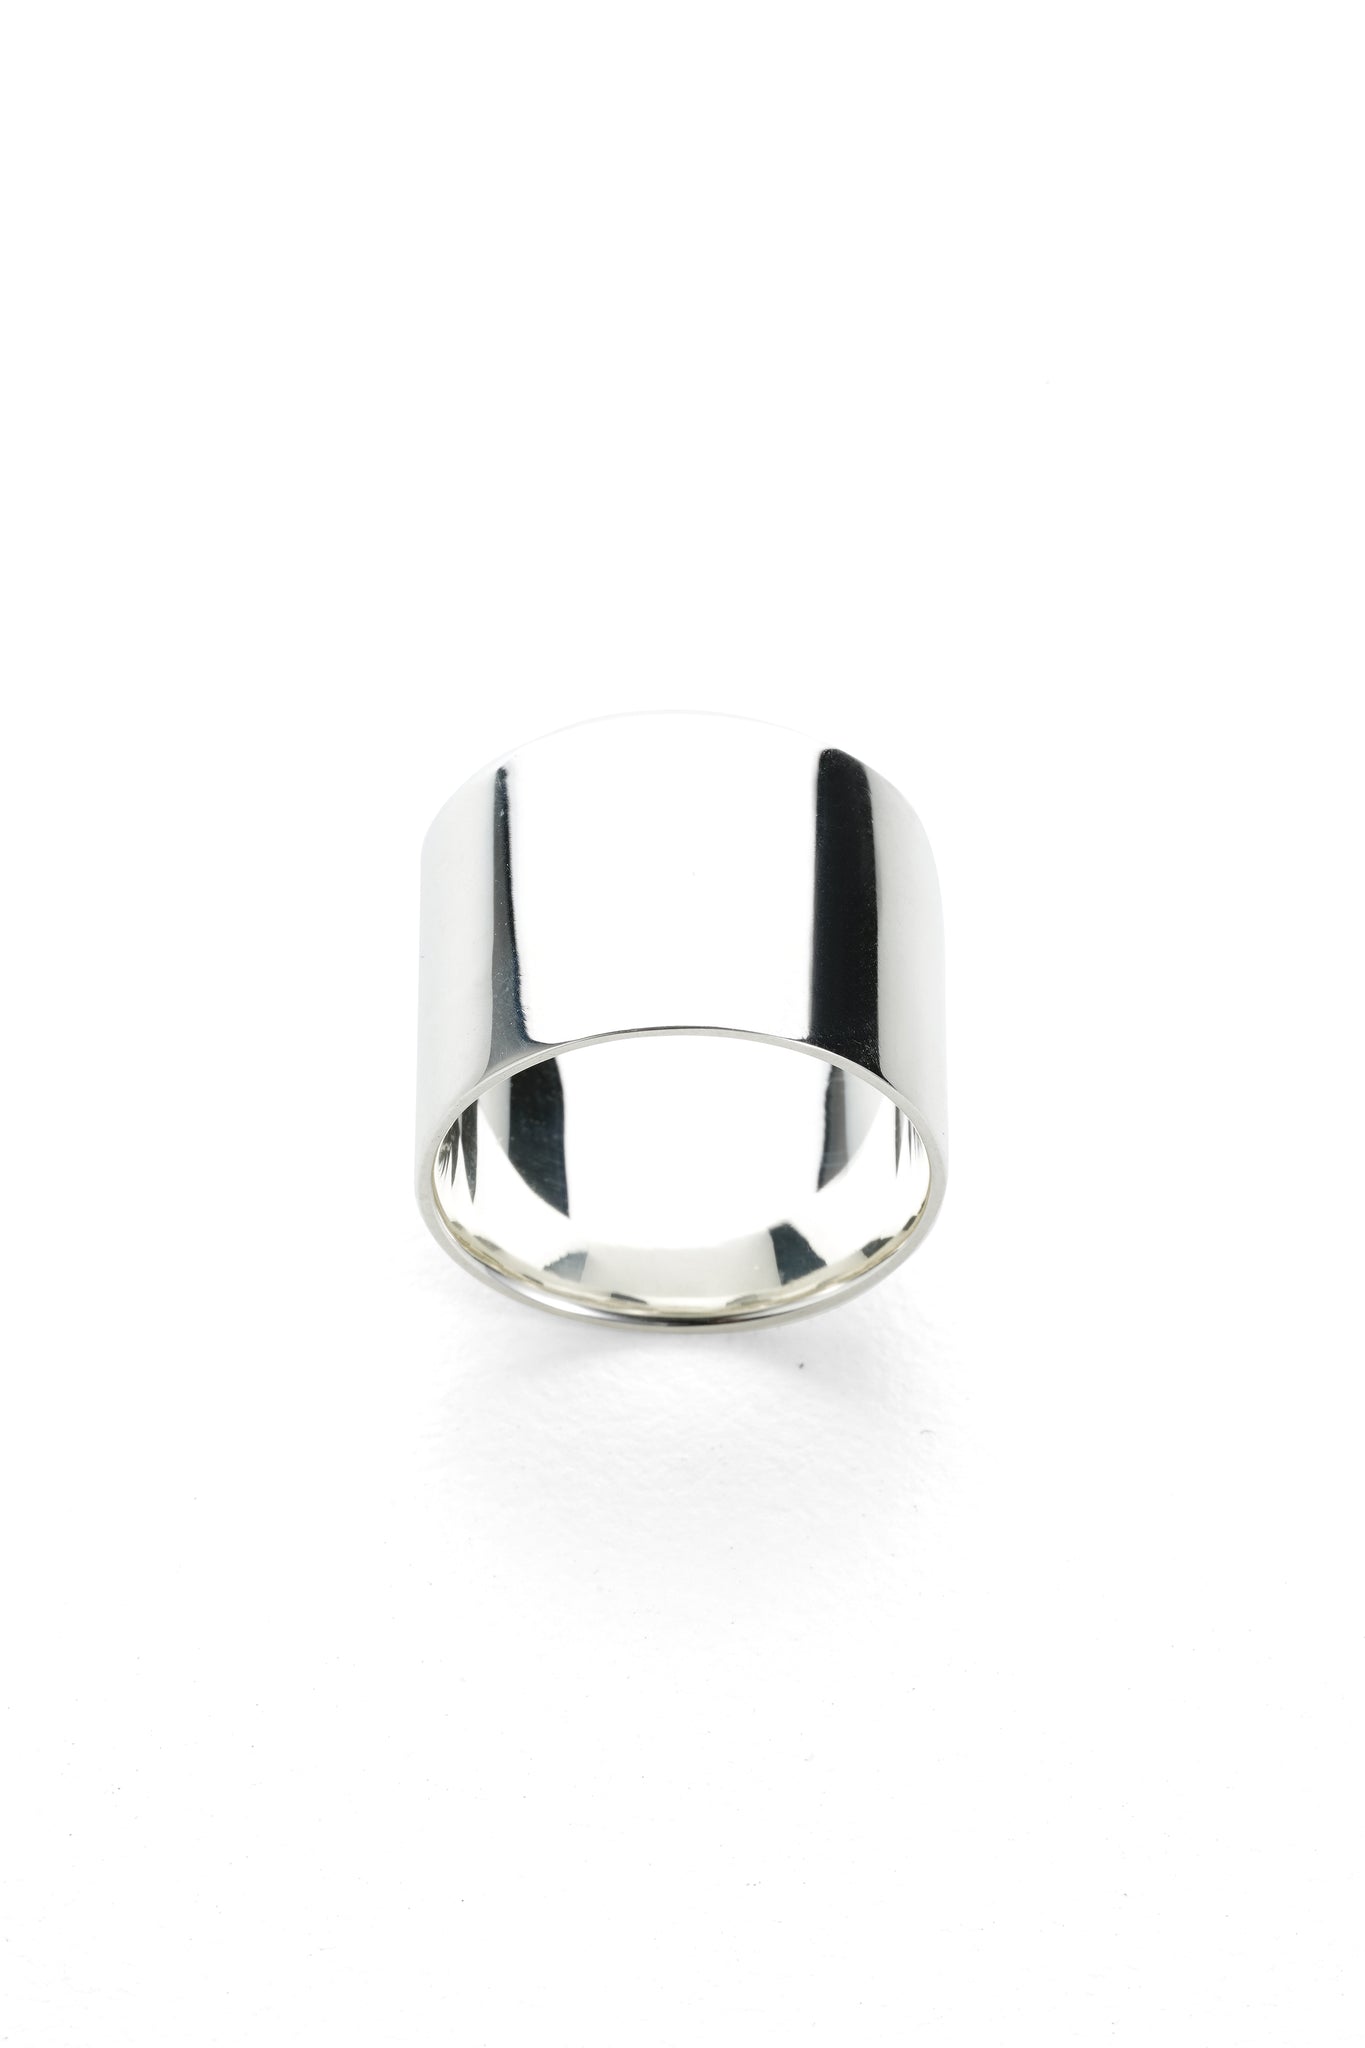 PT RING 04 (SILVER925)